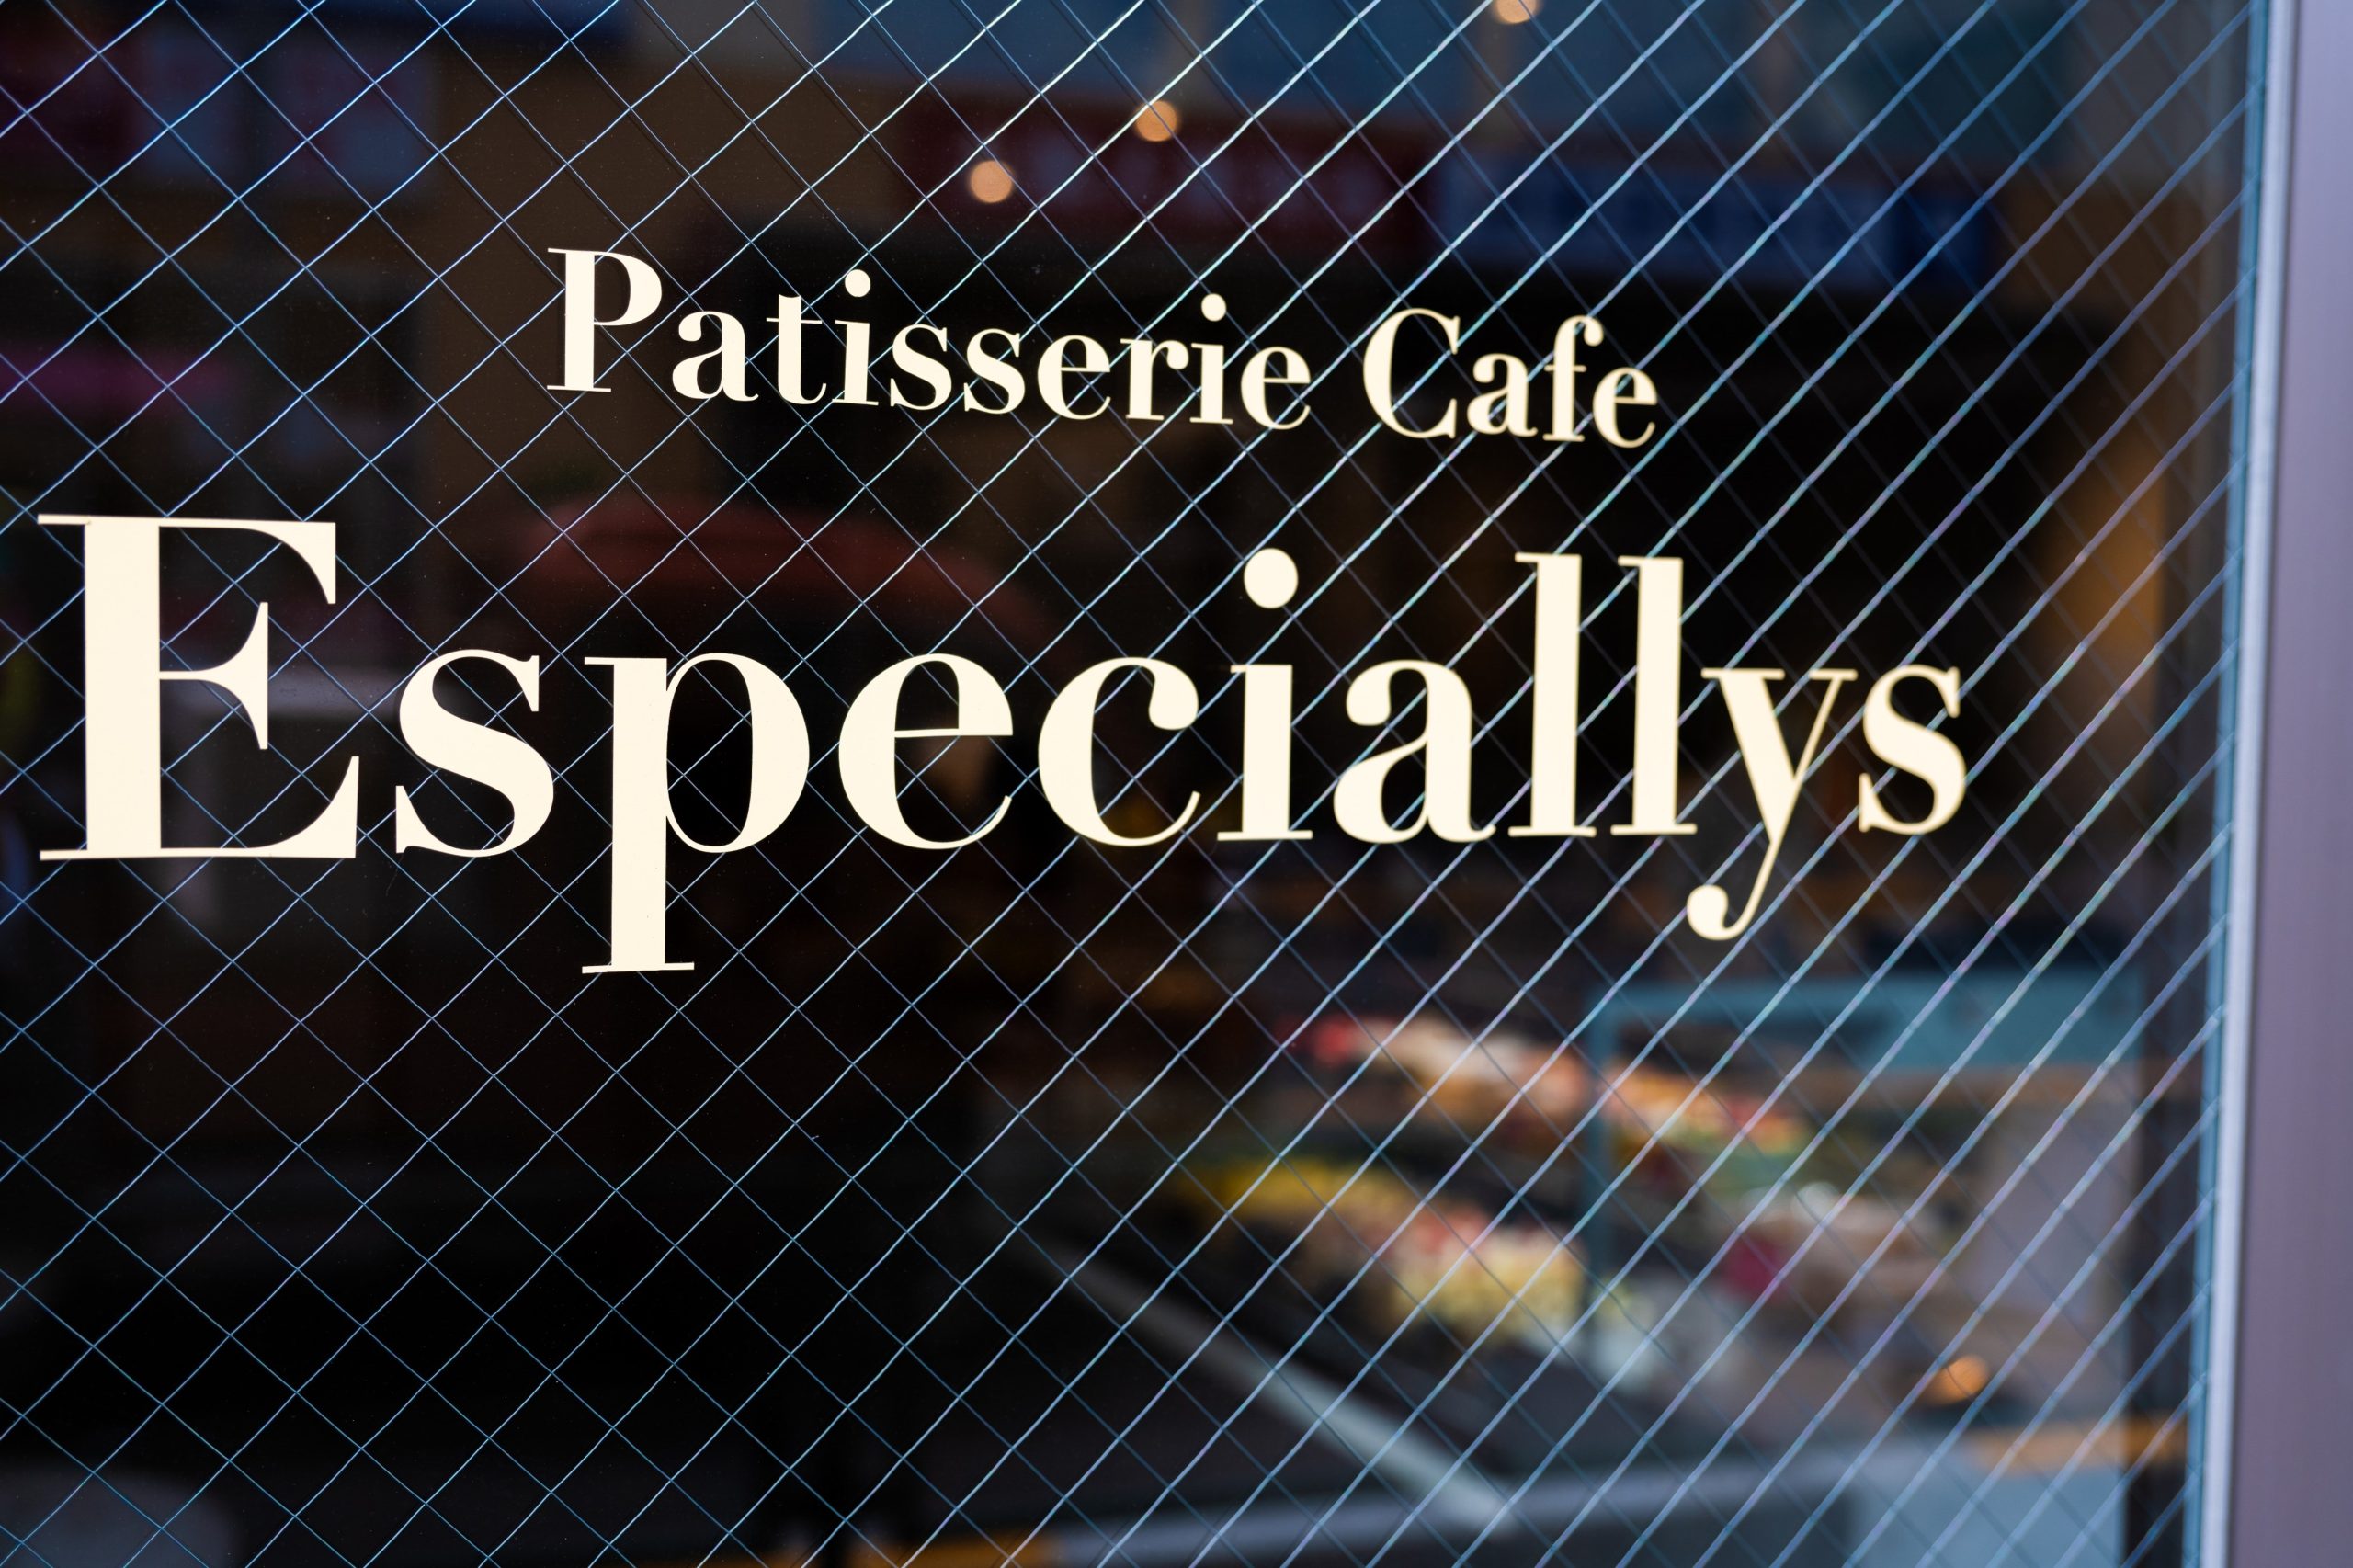 Patisserie cafe especially’s　関谷千弘さん